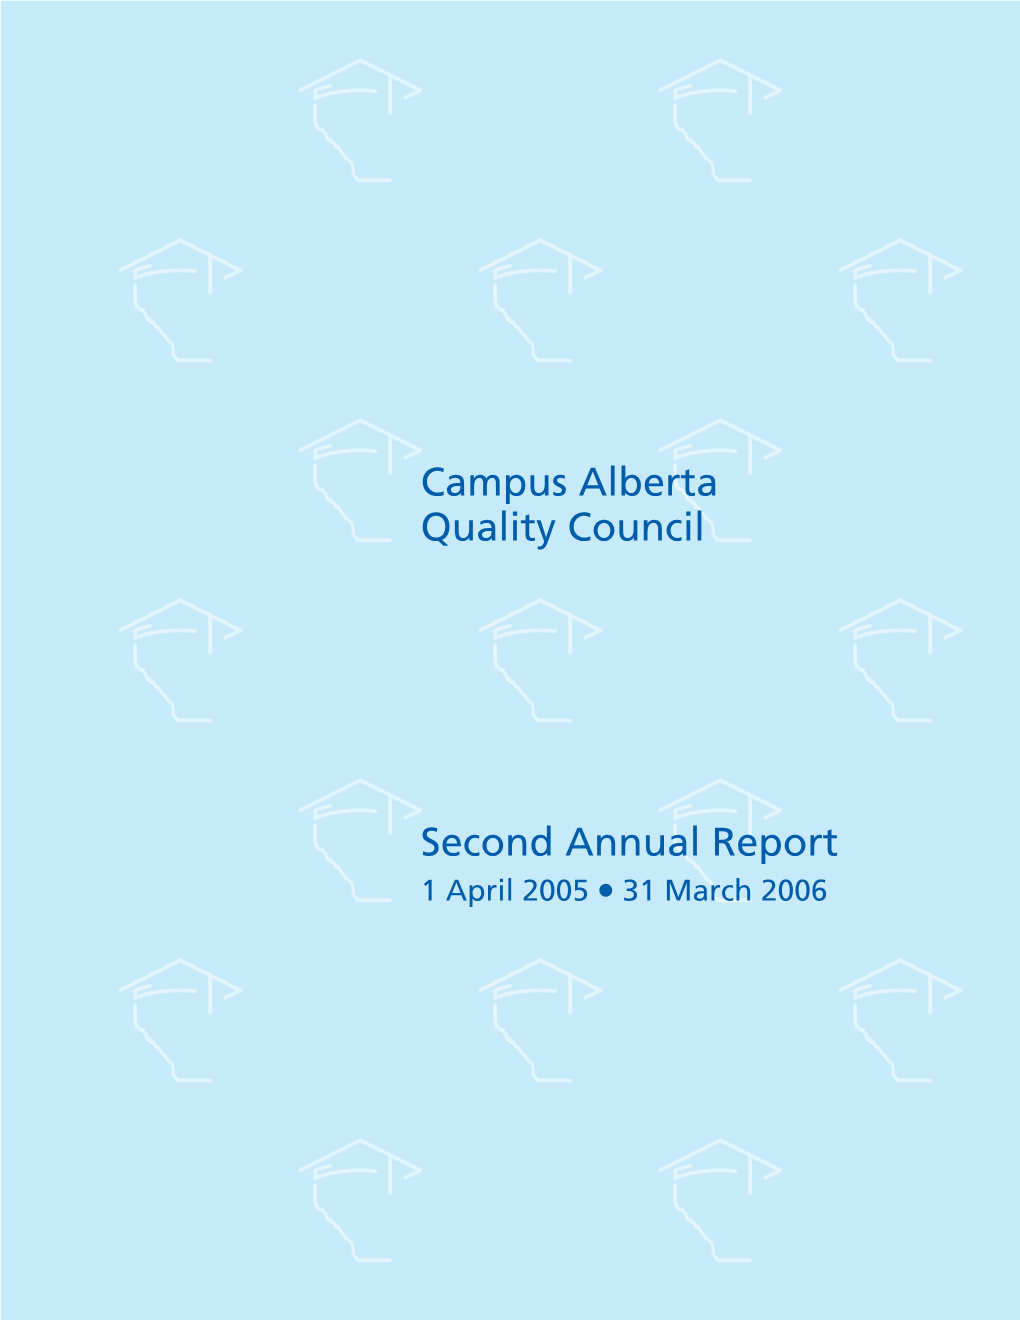 Campus Alberta Quality Council Second Annual Report